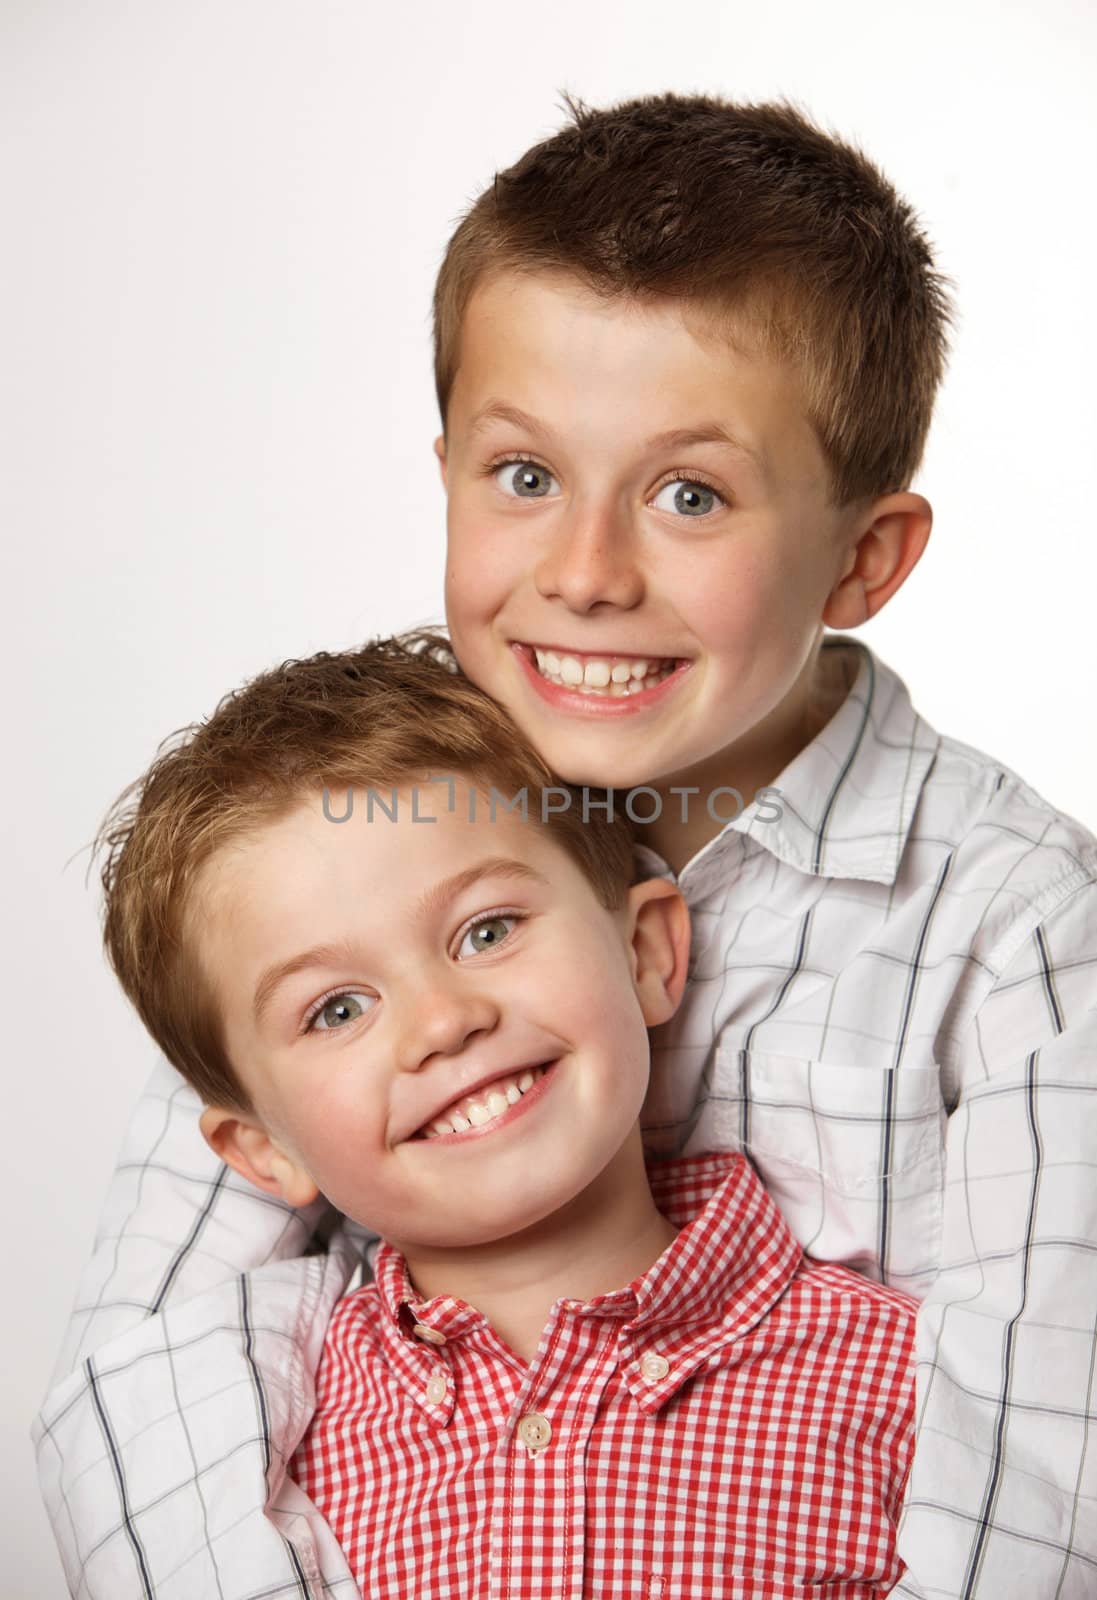 	
two cute young boys smilling